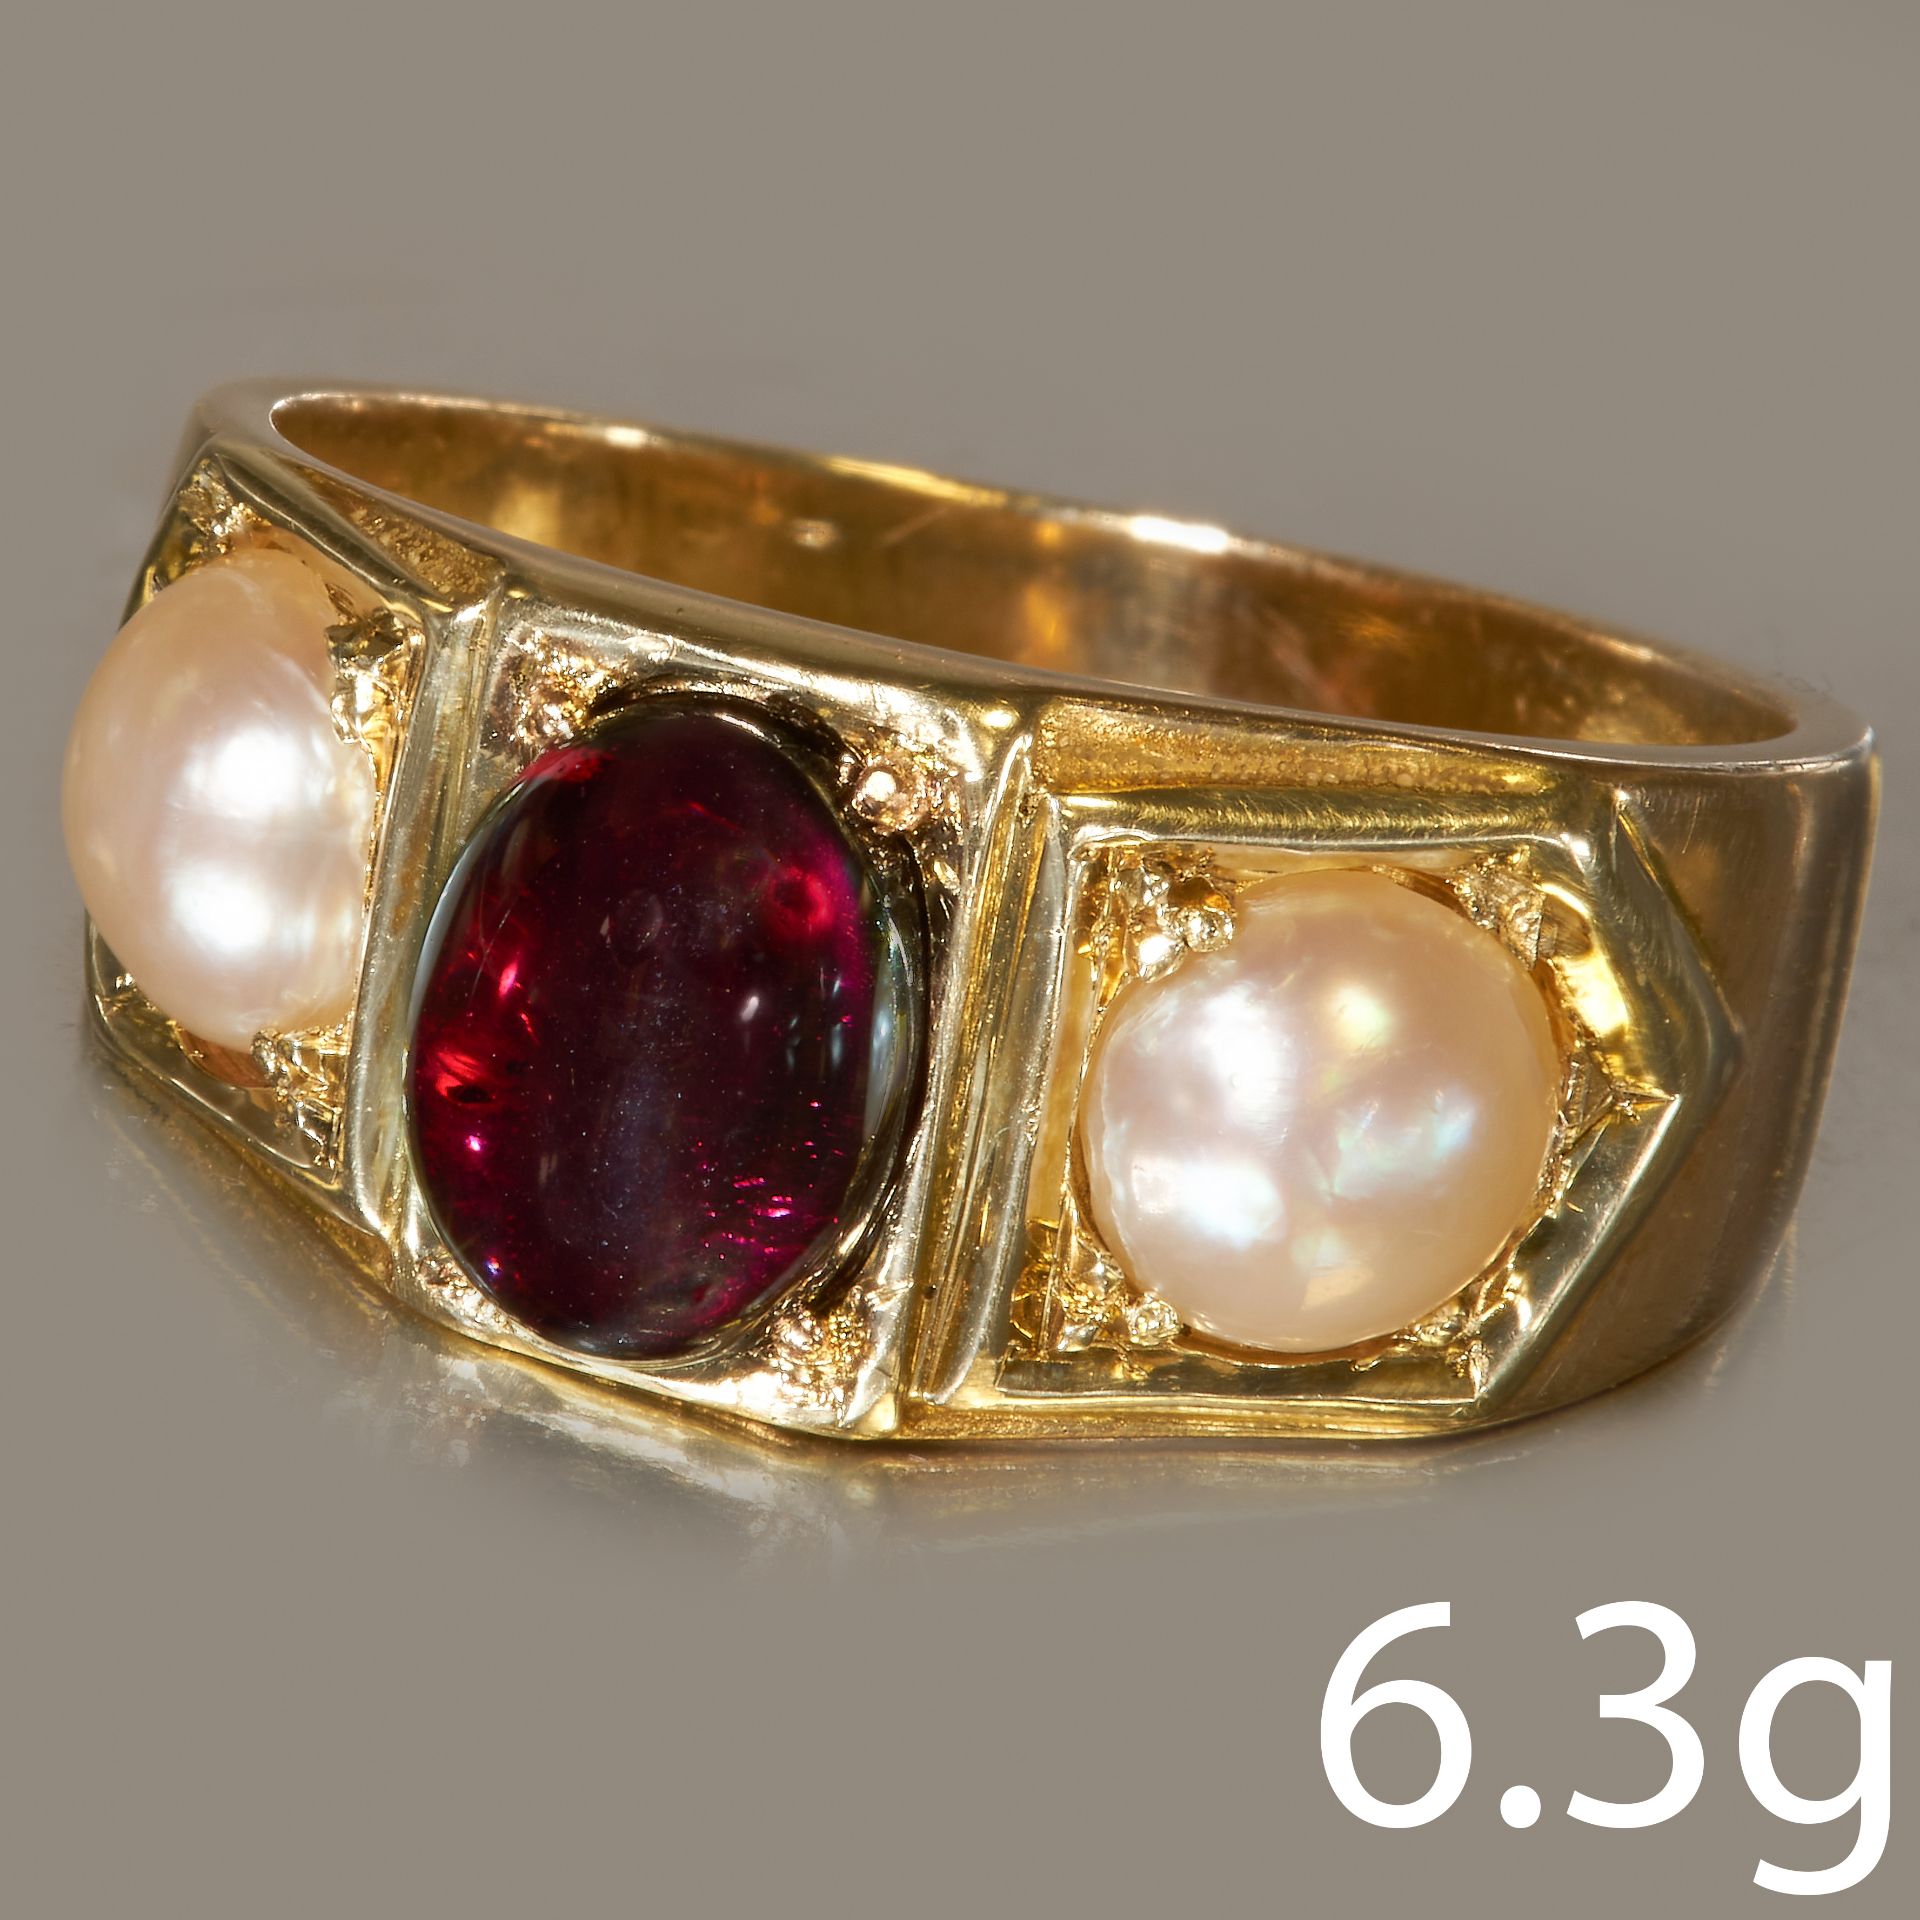 GARNET AND PEARL 3-STONE RING